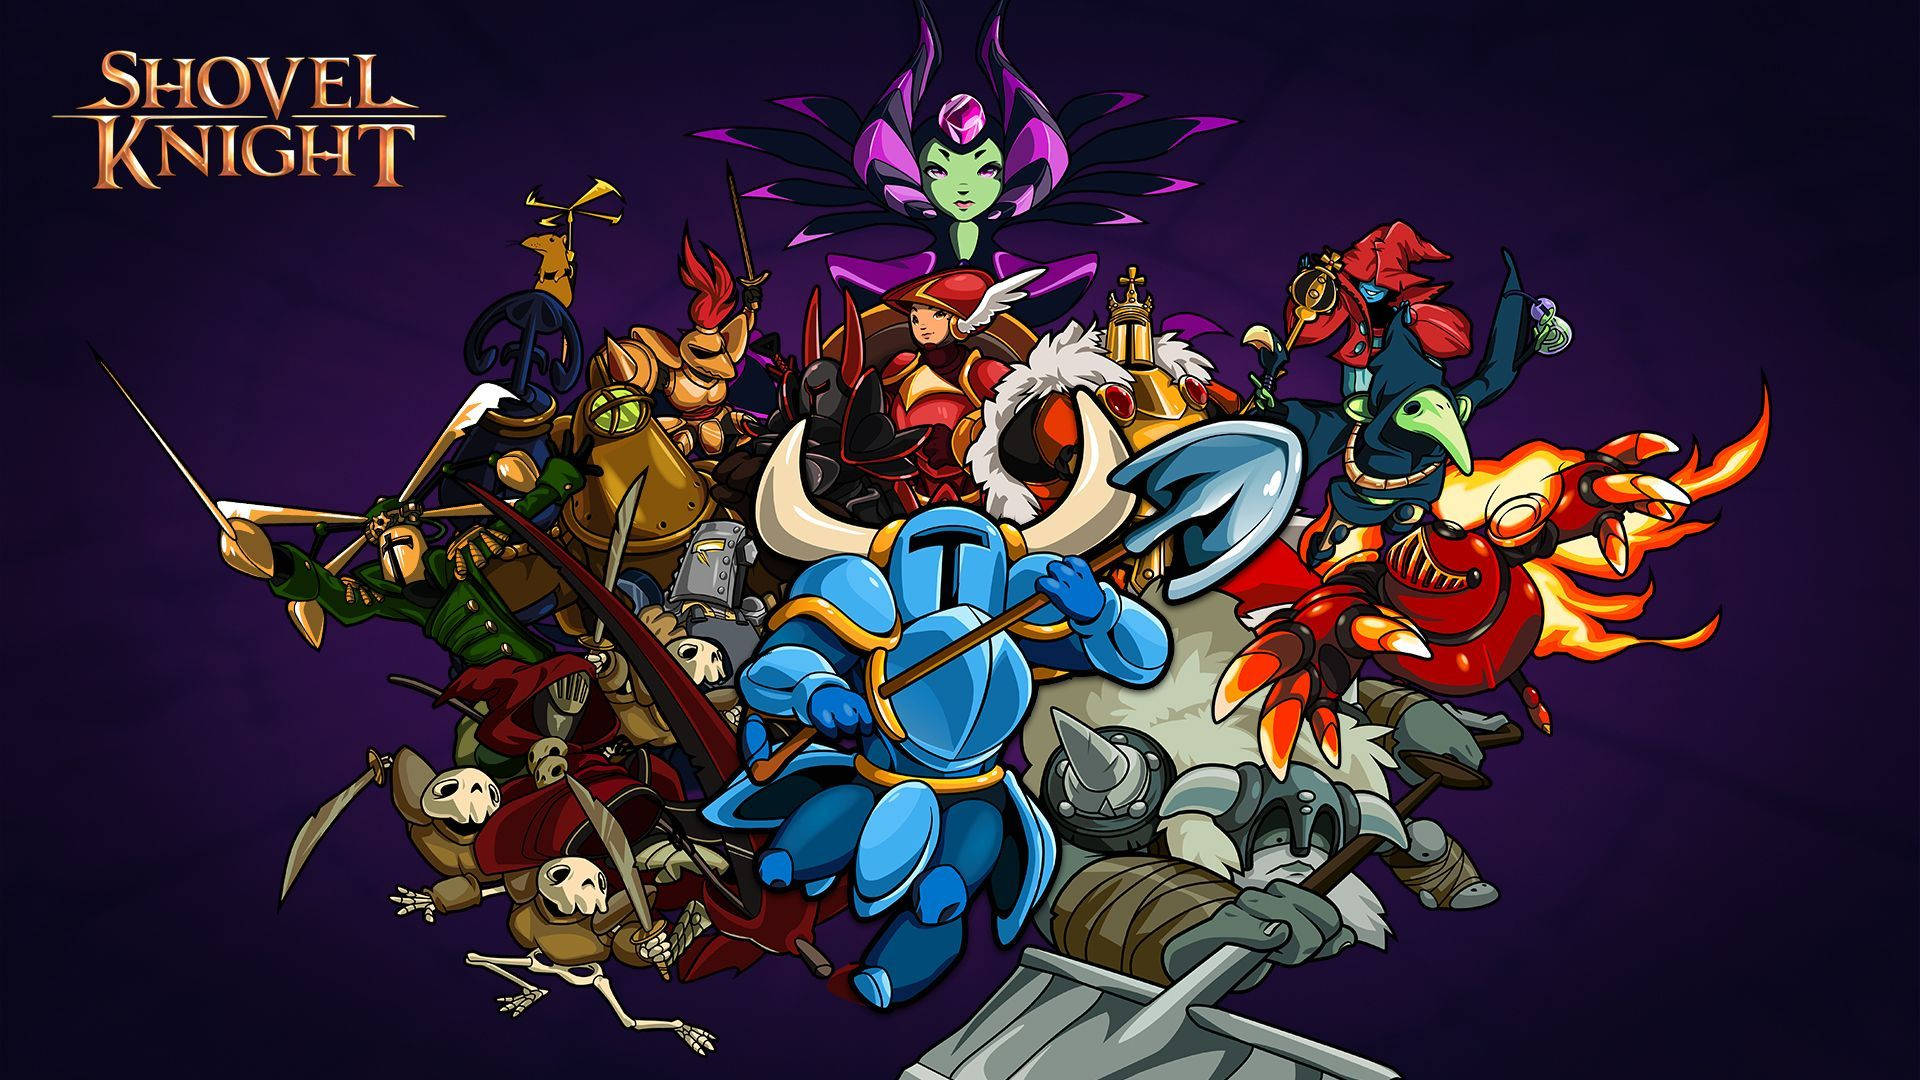 Exciting Characters From The Shovel Knight Game Background